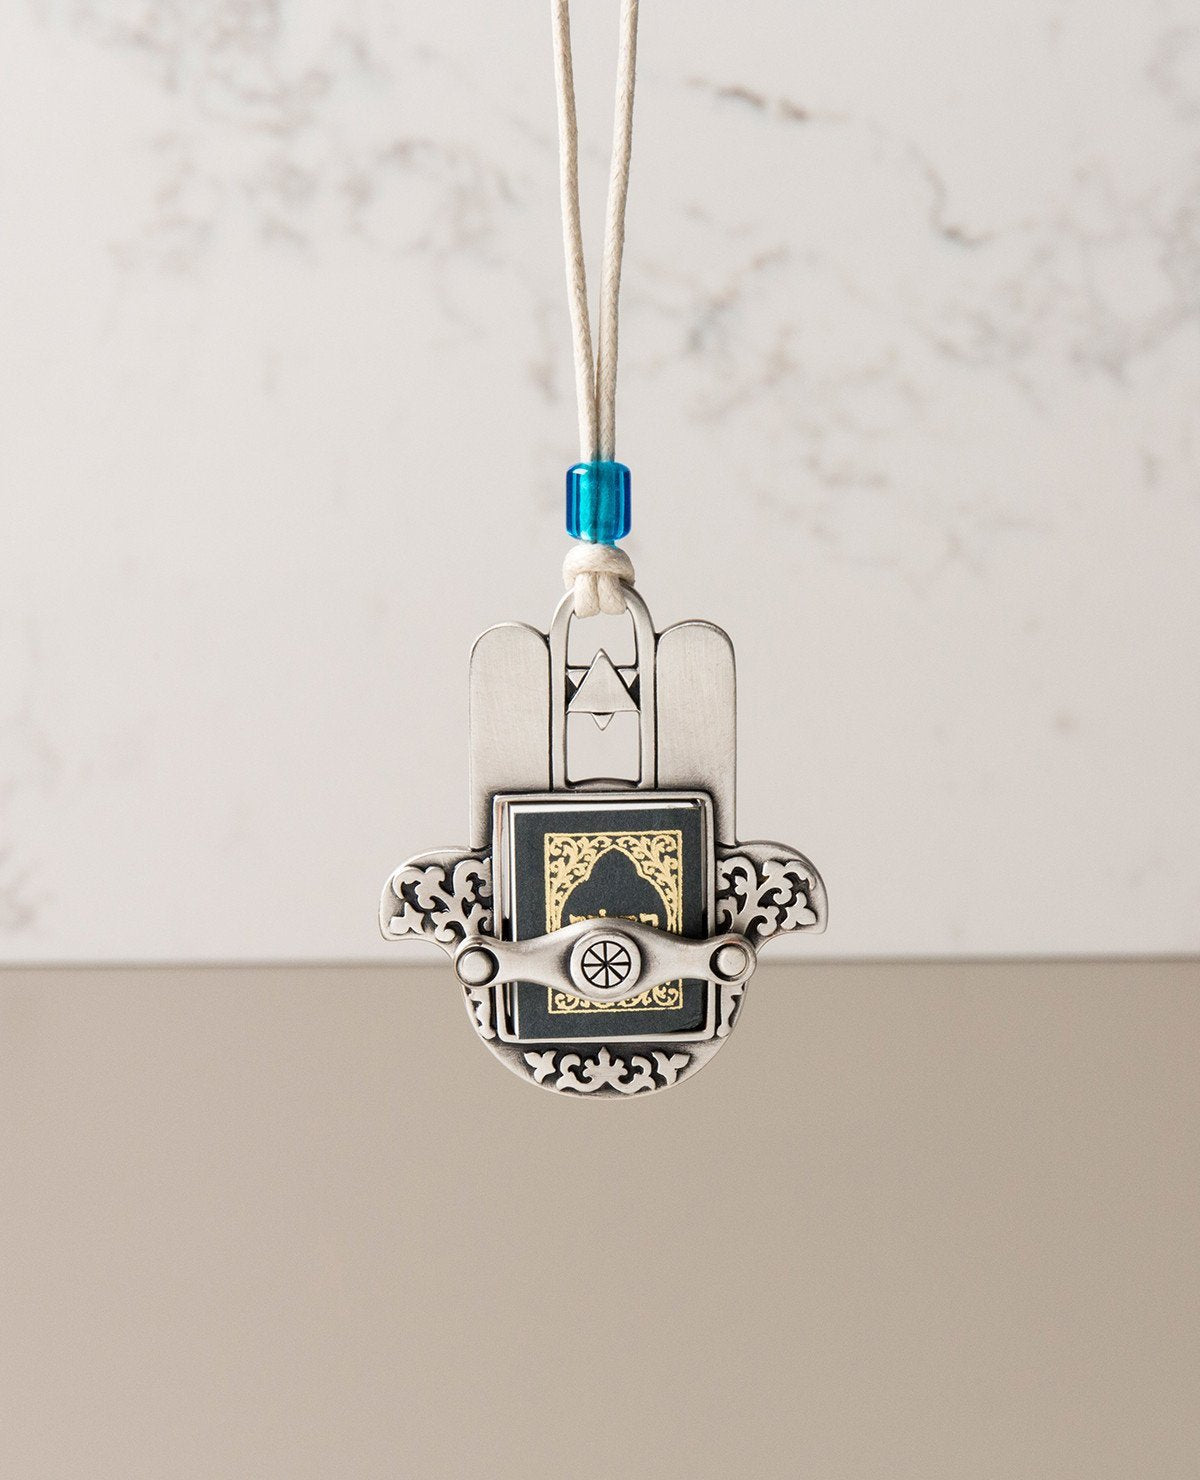 Sterling silver plated car pendant with a blue bead.  Length: 7 cm  Width: 6 cm